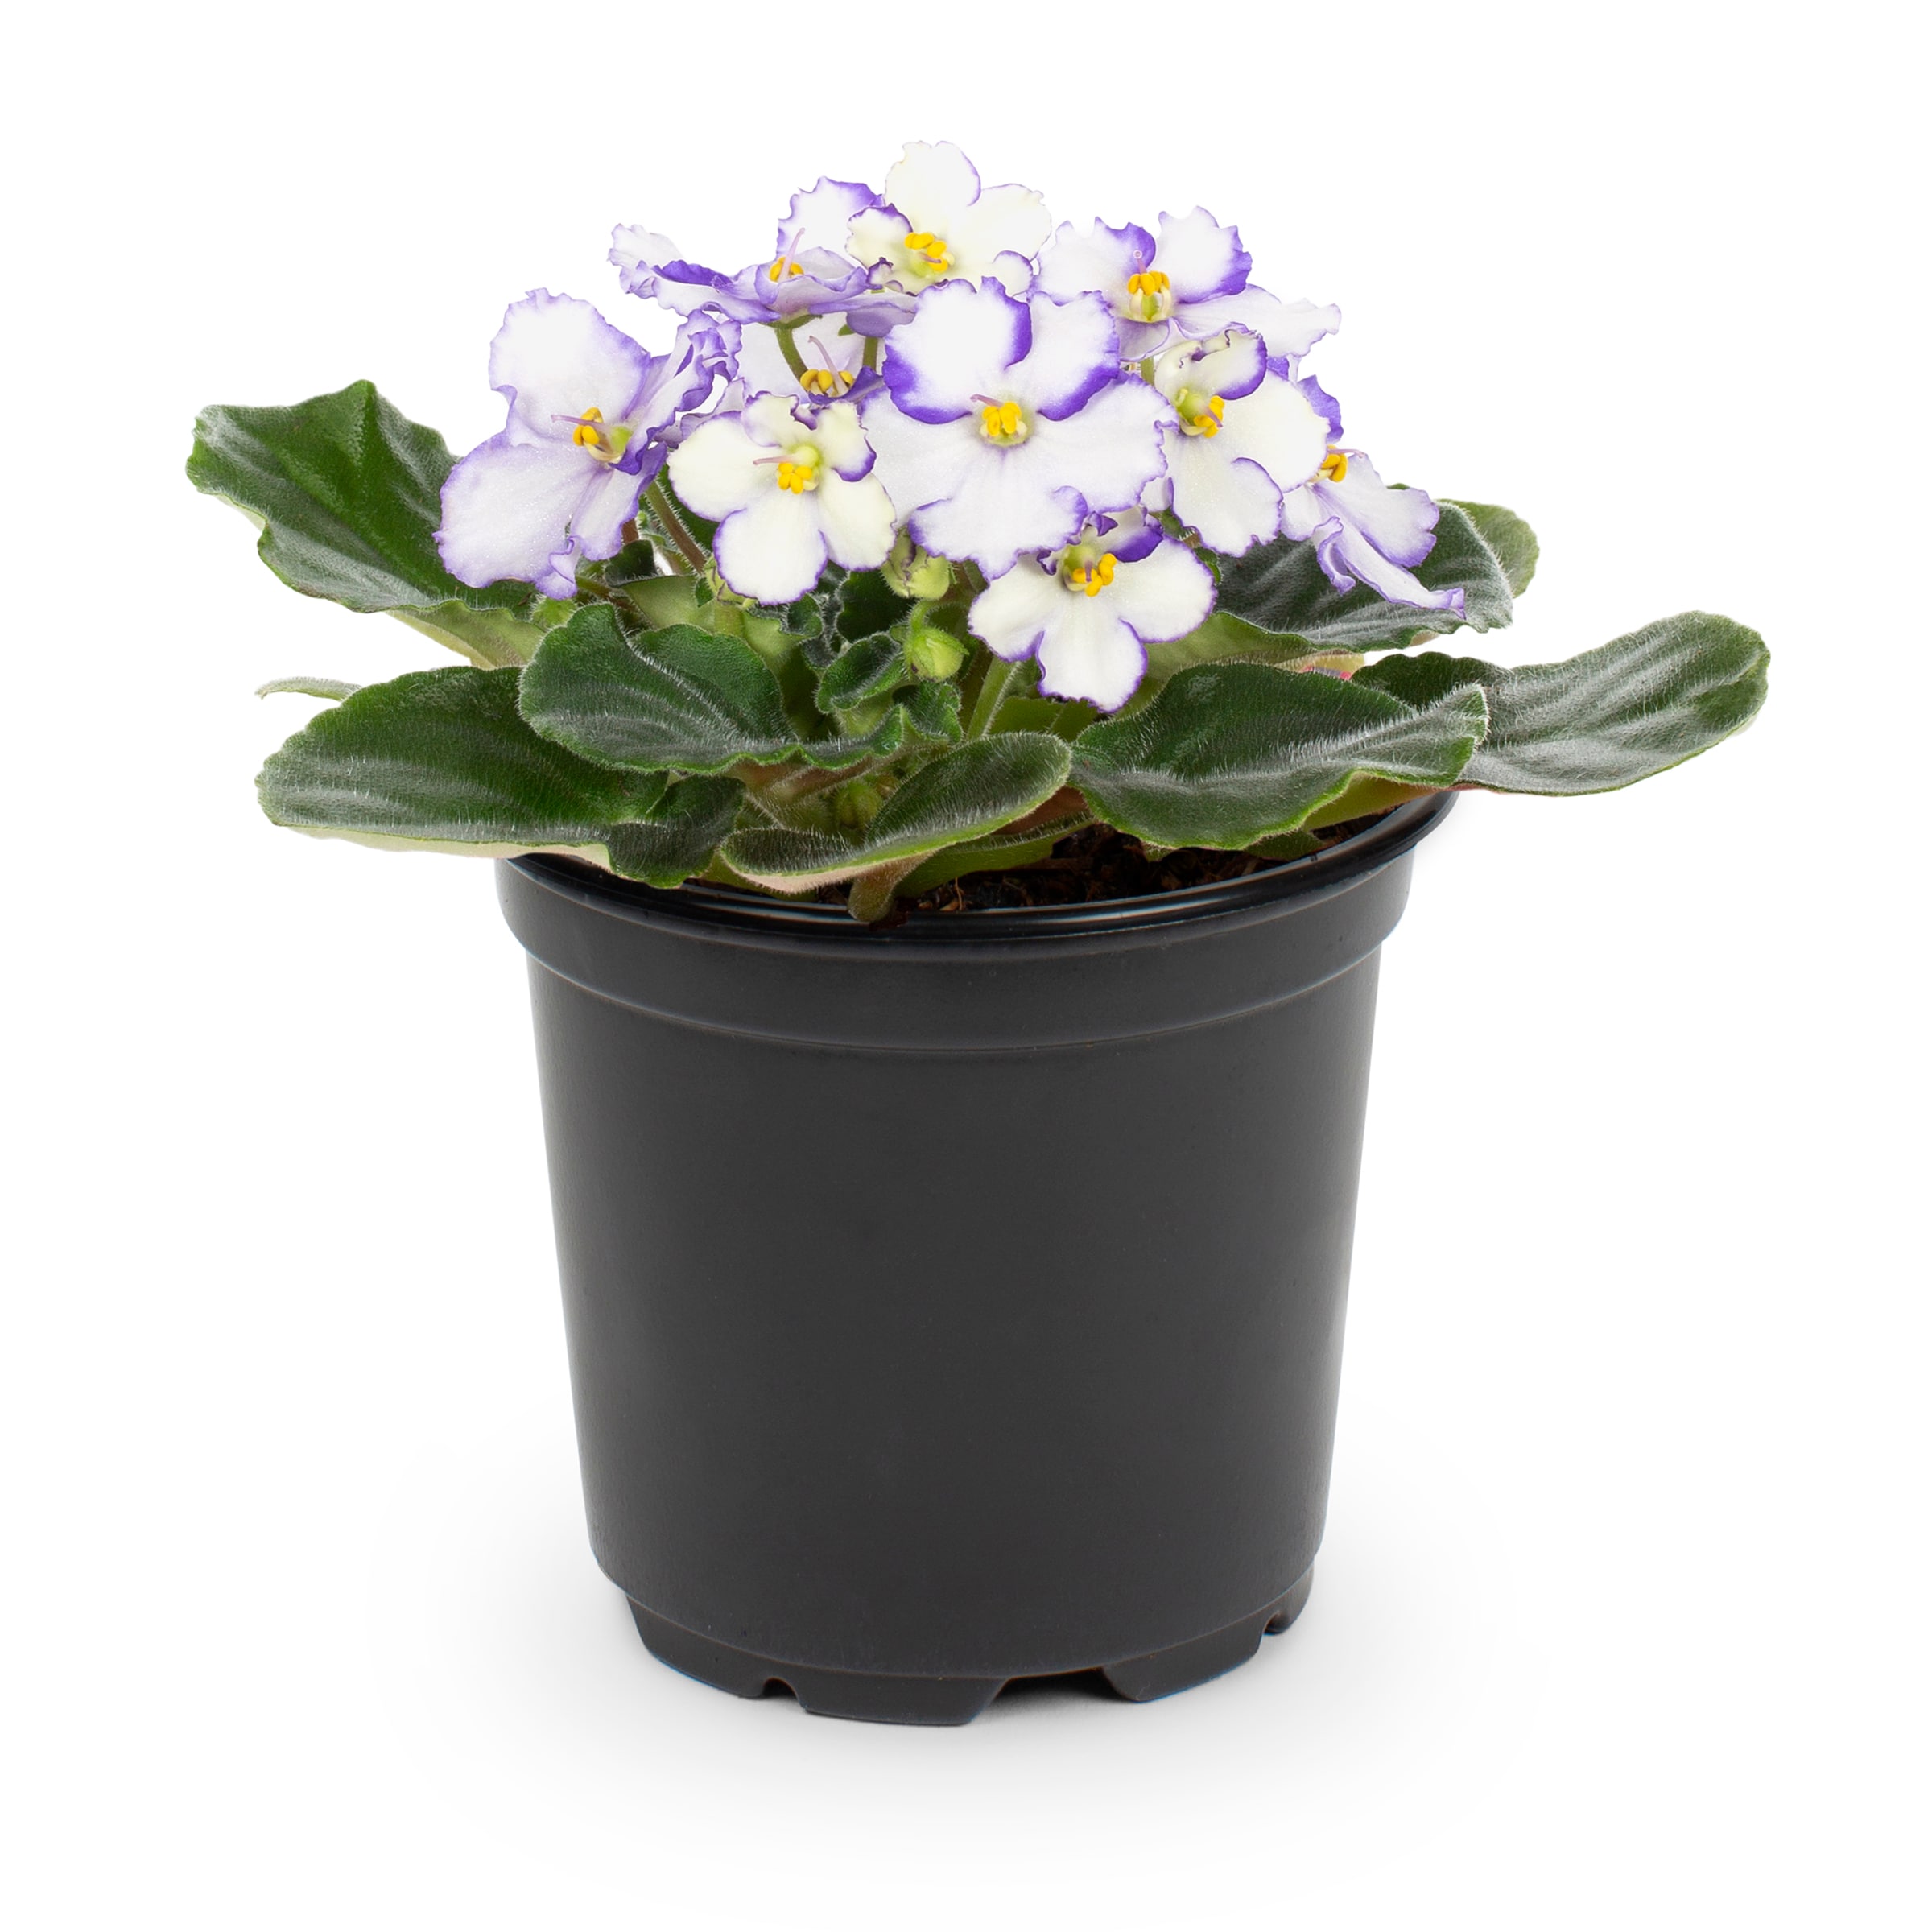 African Violet House Plants at Lowes.com